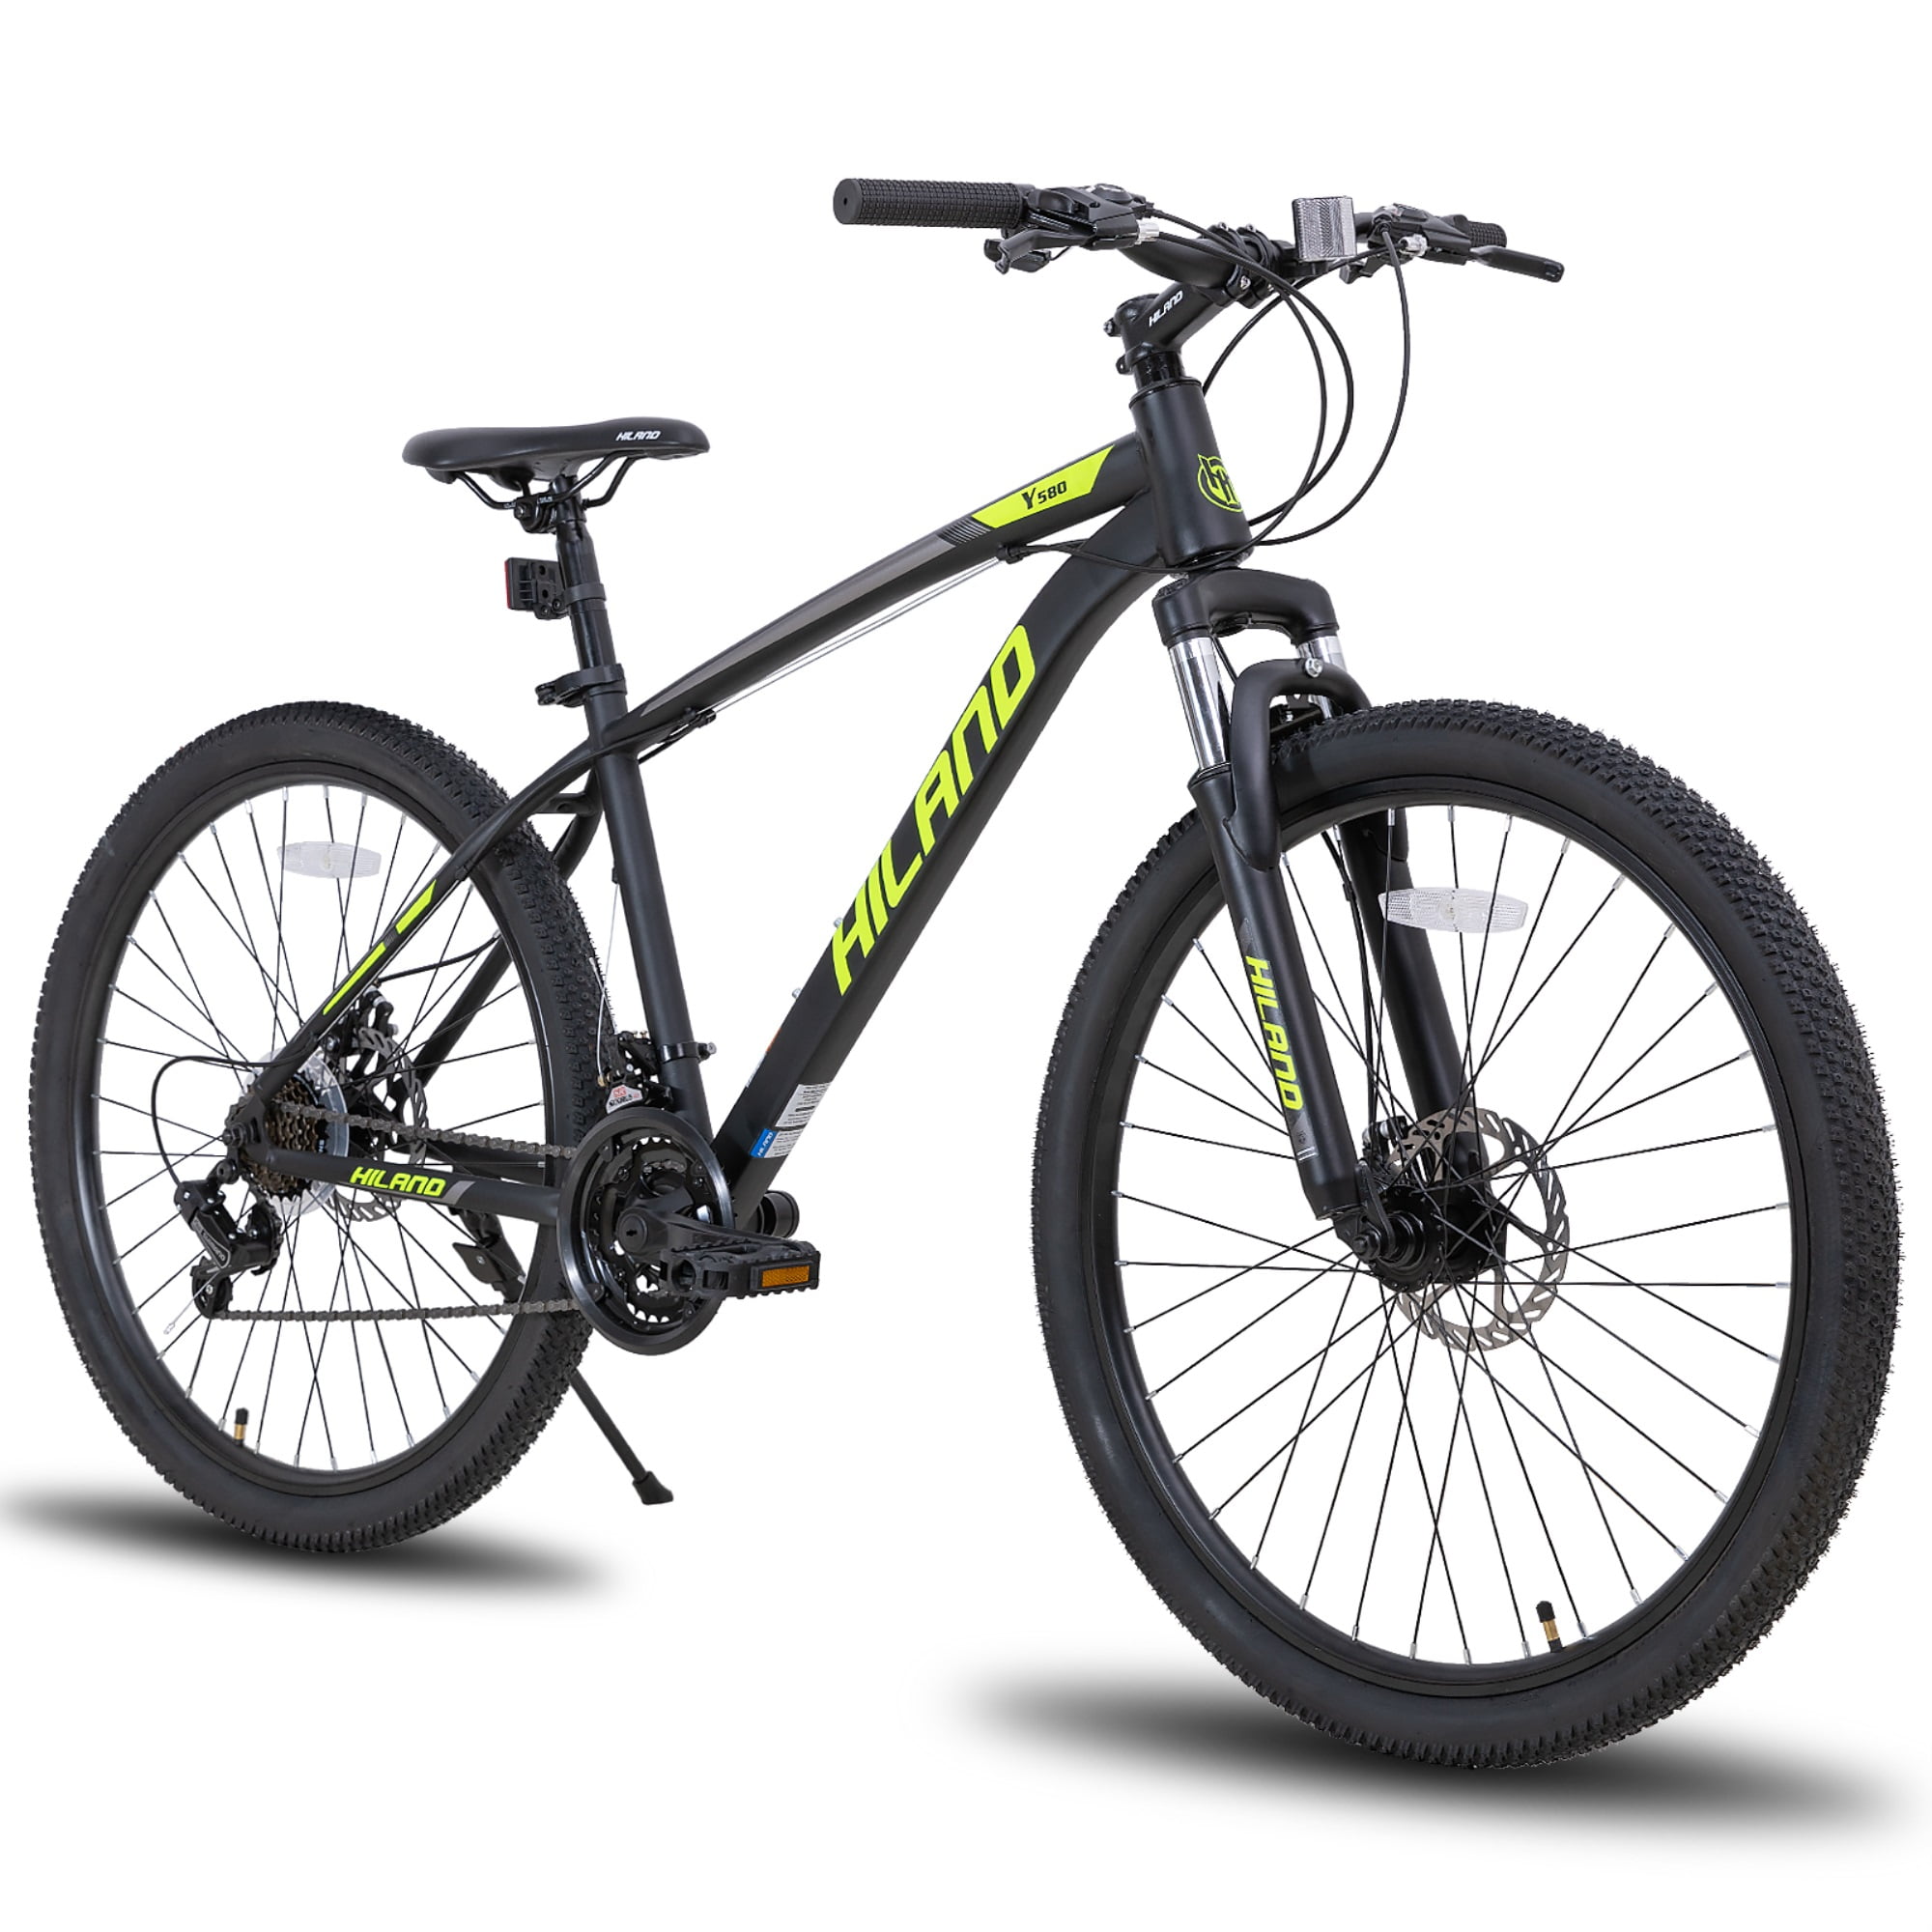 Hiland Mountain Bike with Suspension Fork